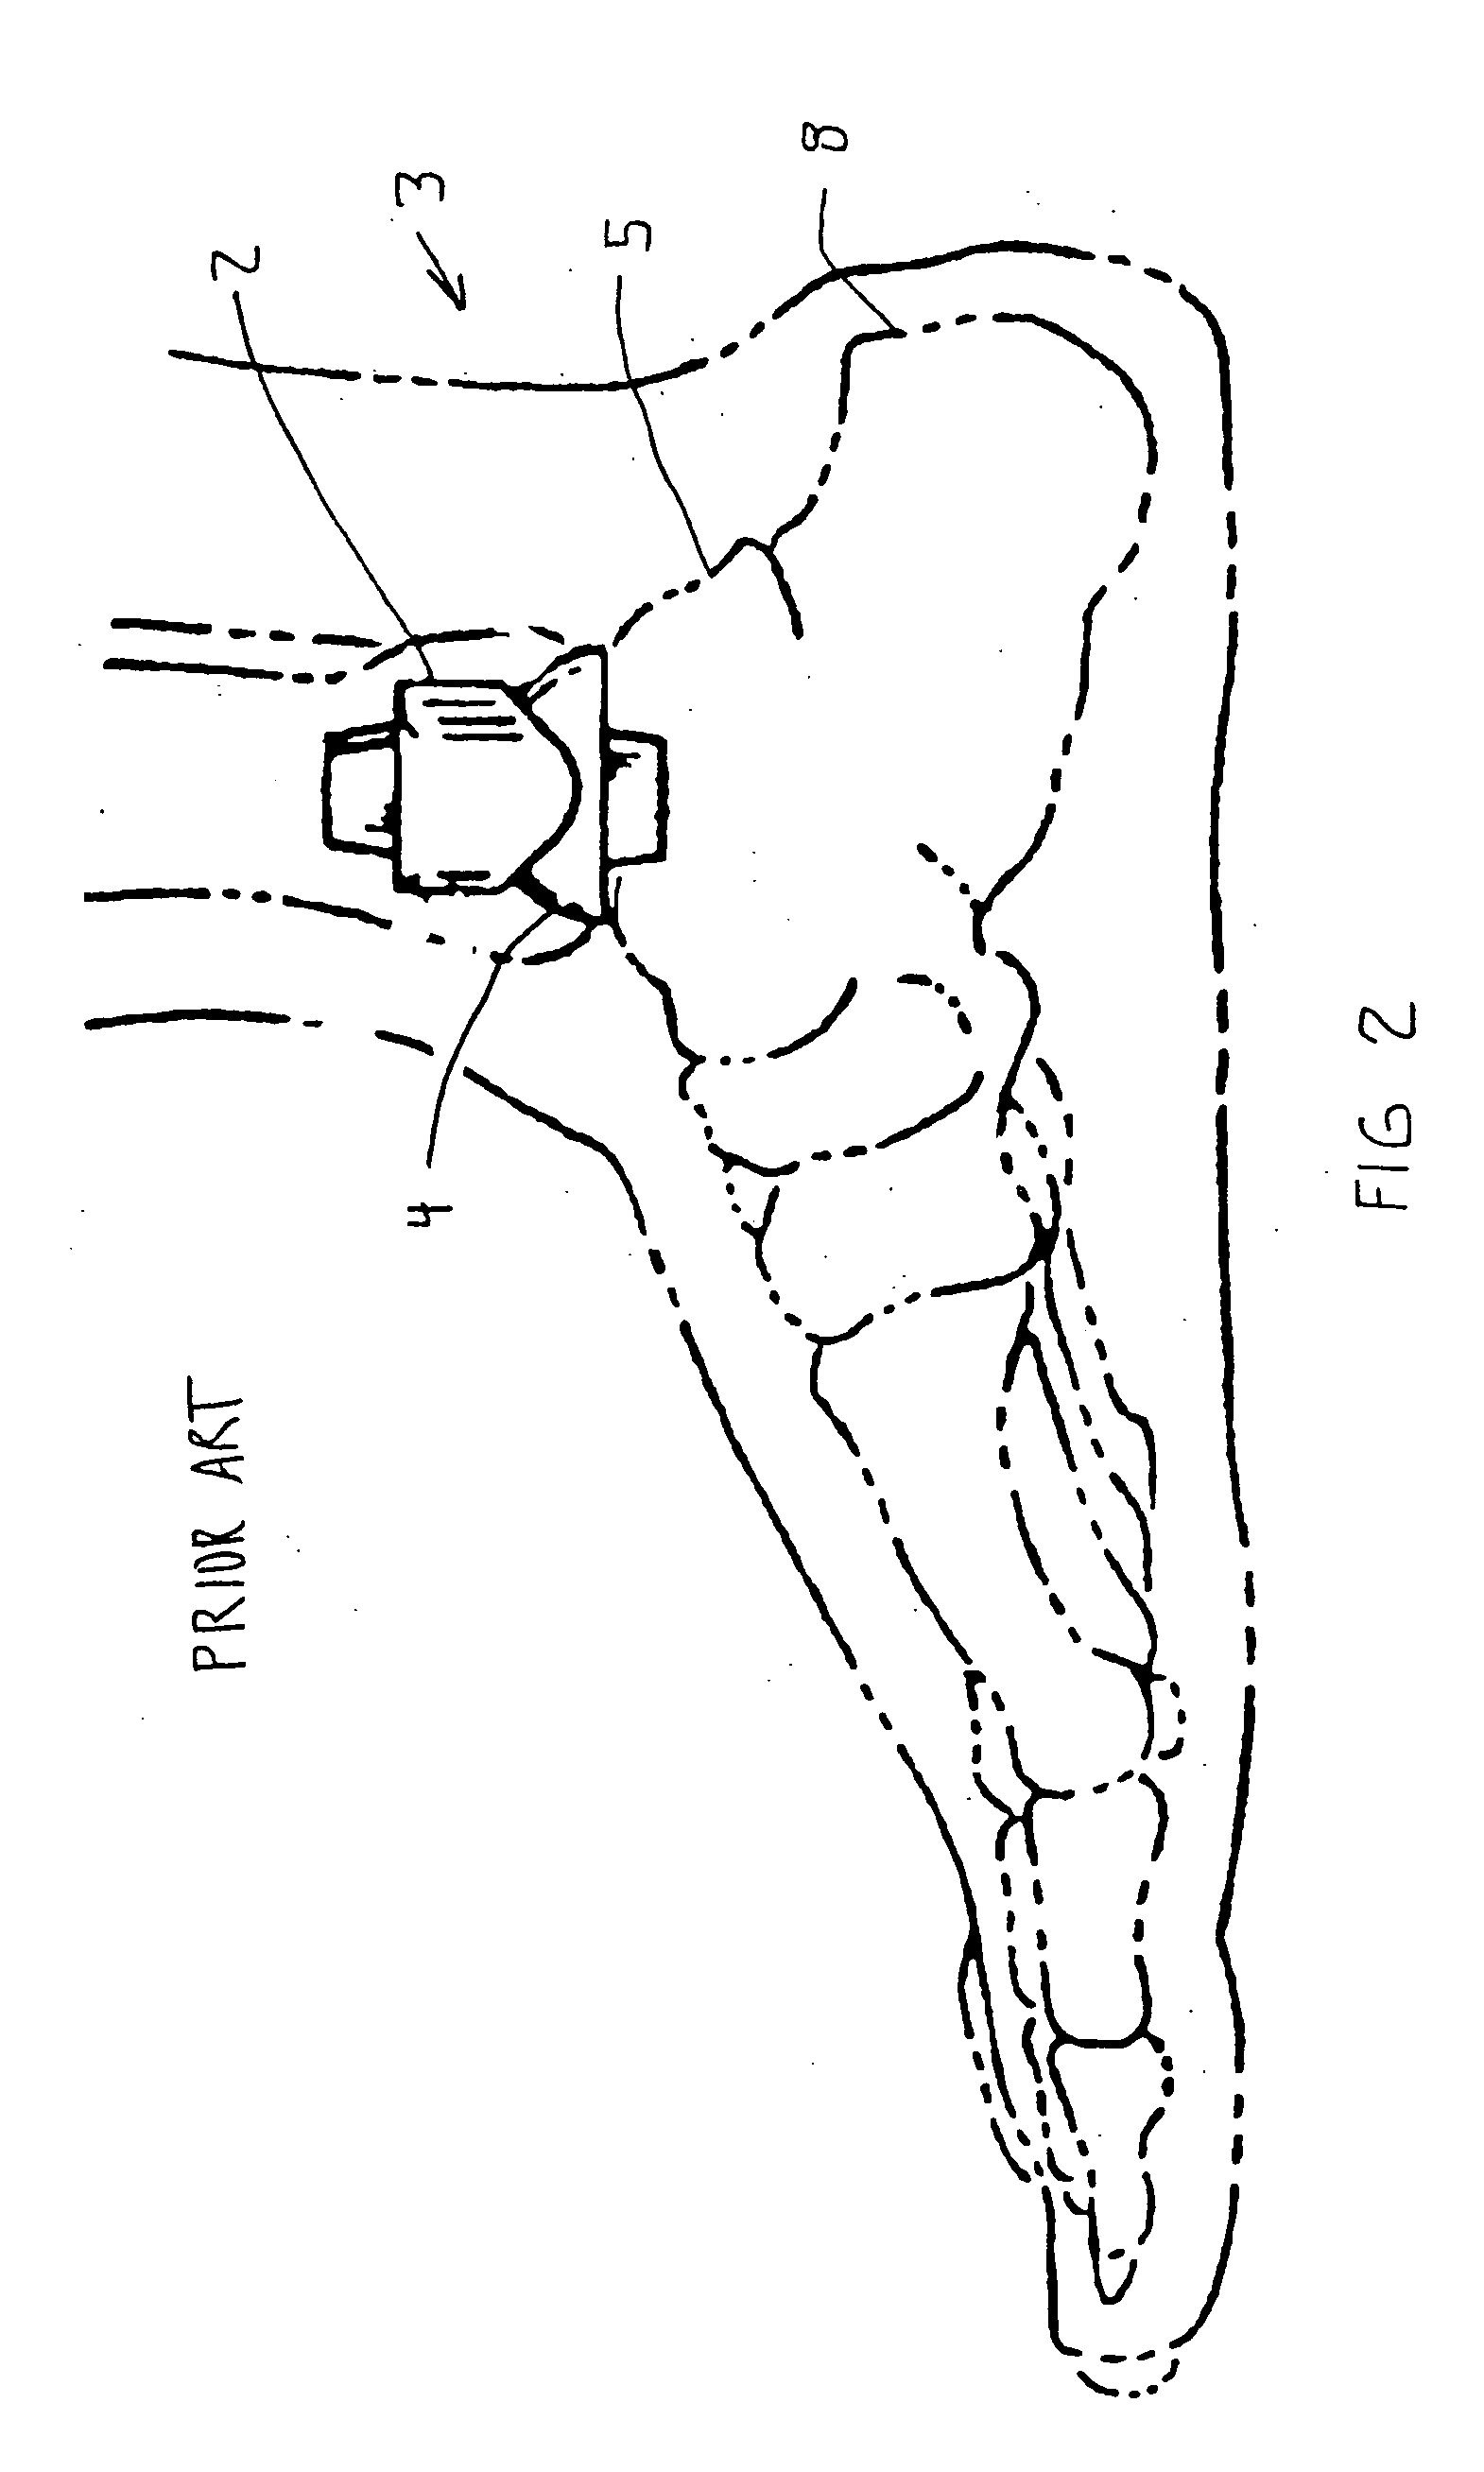 Modular ankle prosthesis and associated method